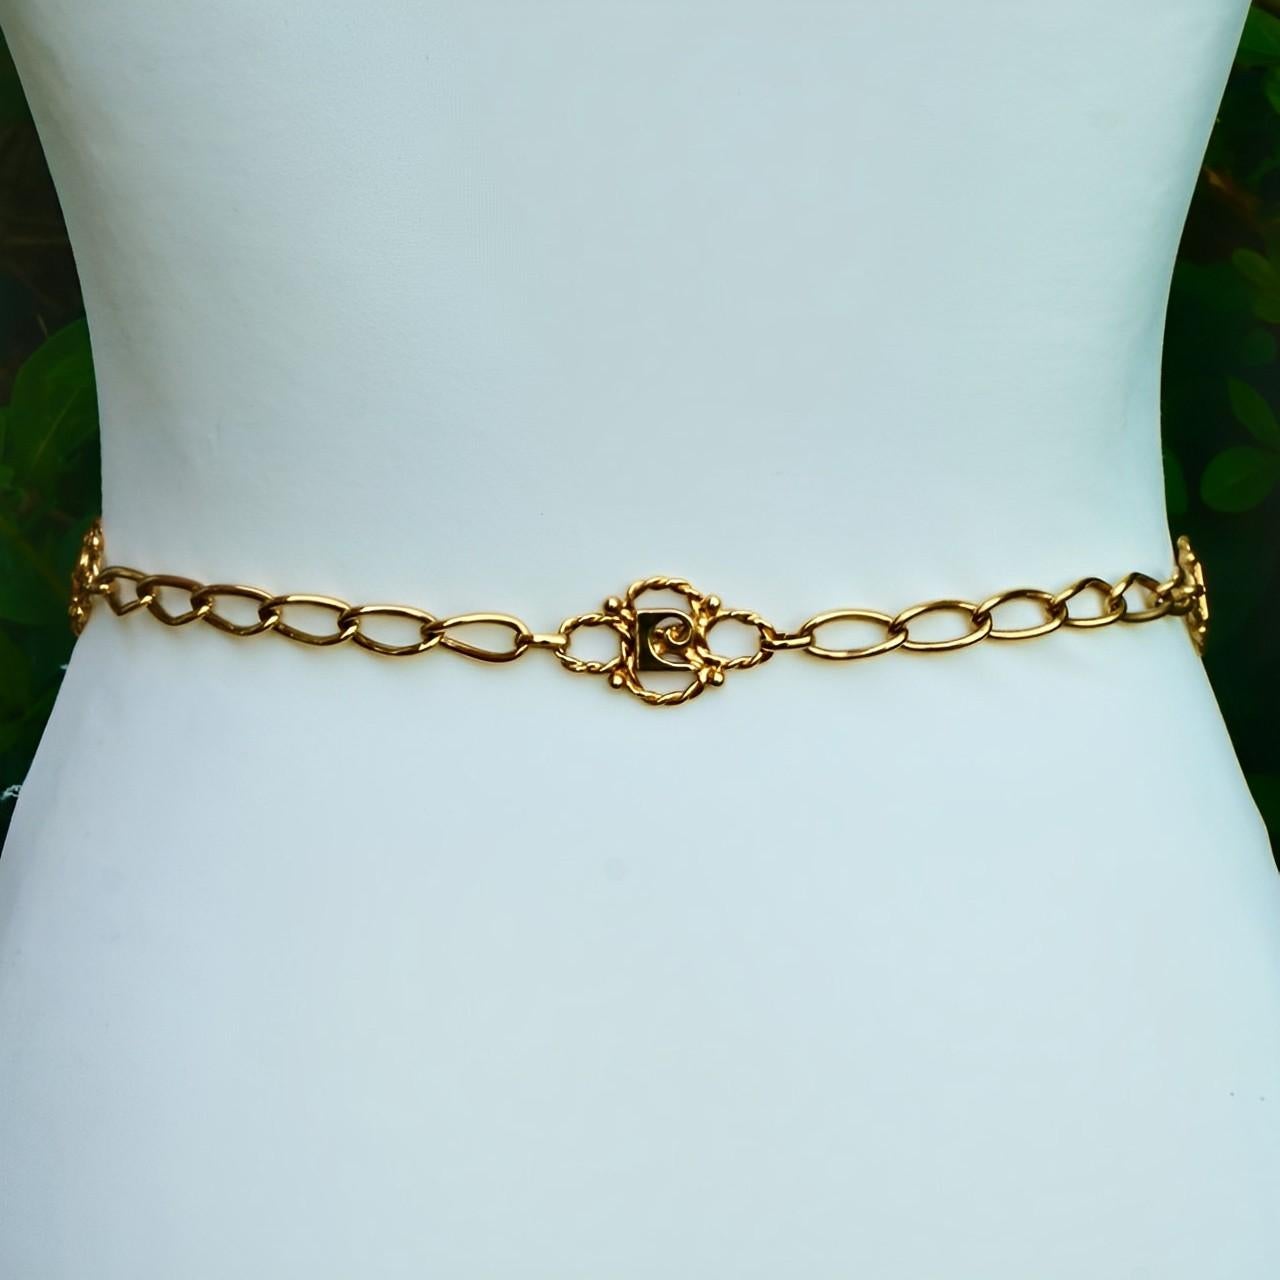 Pierre Cardin Monogram Gold Plated Chain Link Belt circa 1970s For Sale 4